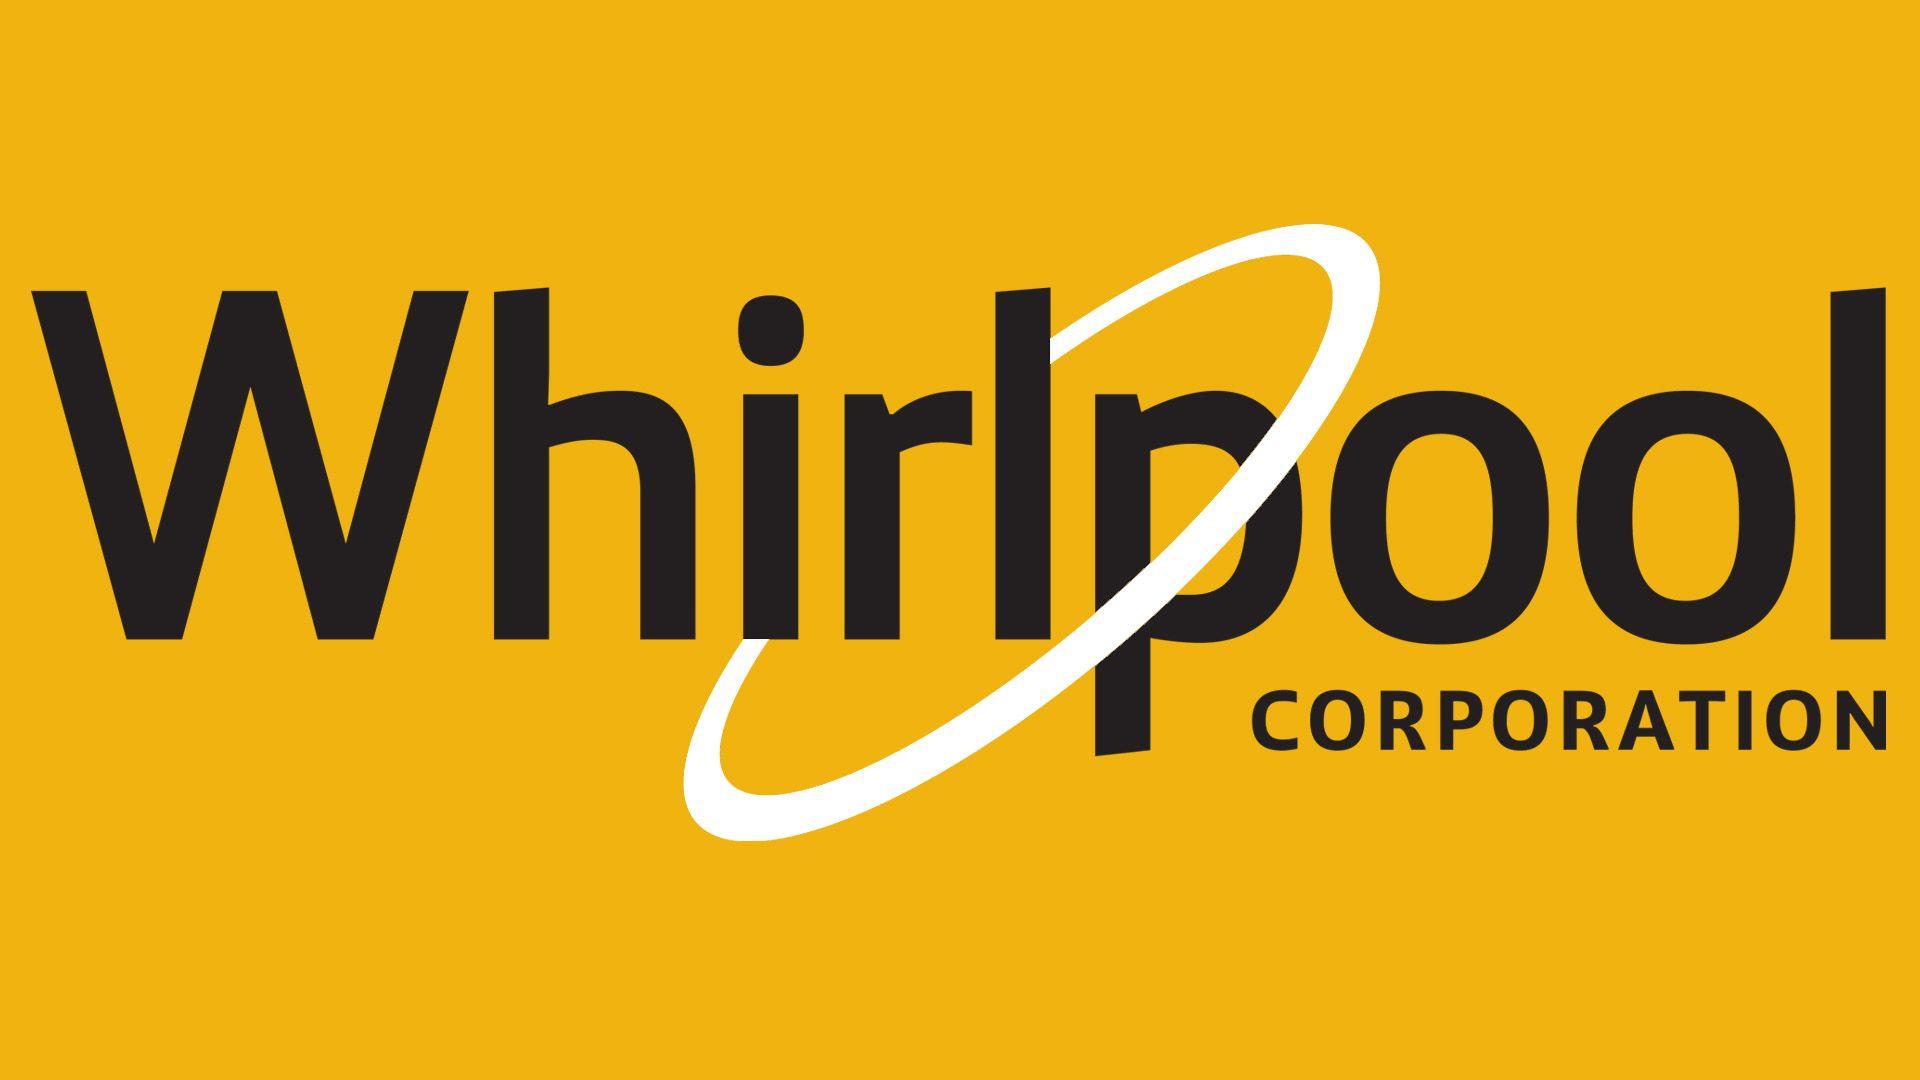 Whirlpool Logo - Whirlpool Logo, Whirlpool Symbol, Meaning, History and Evolution